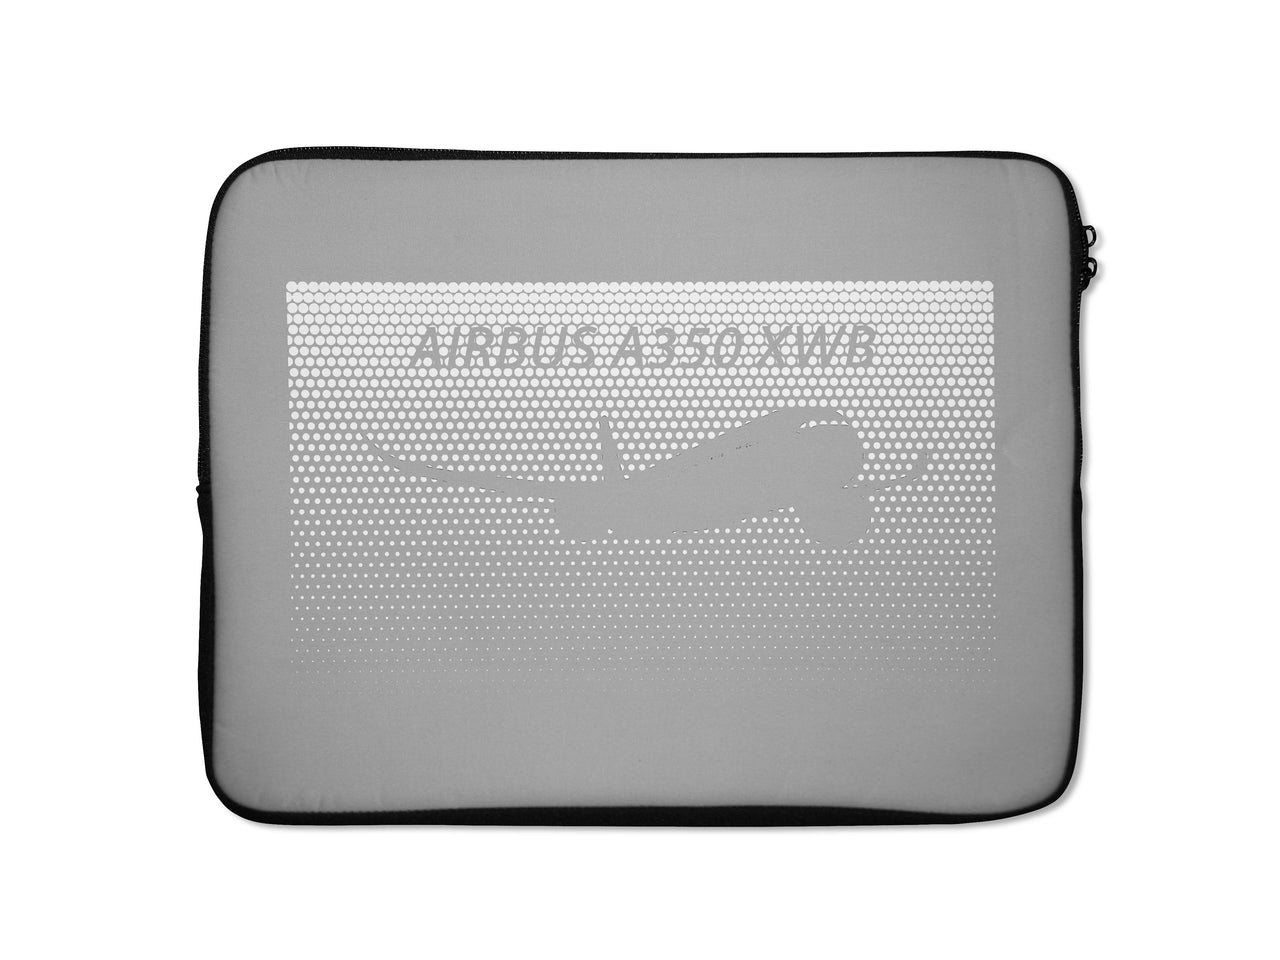 Airbus A350XWB & Dots Designed Laptop & Tablet Cases